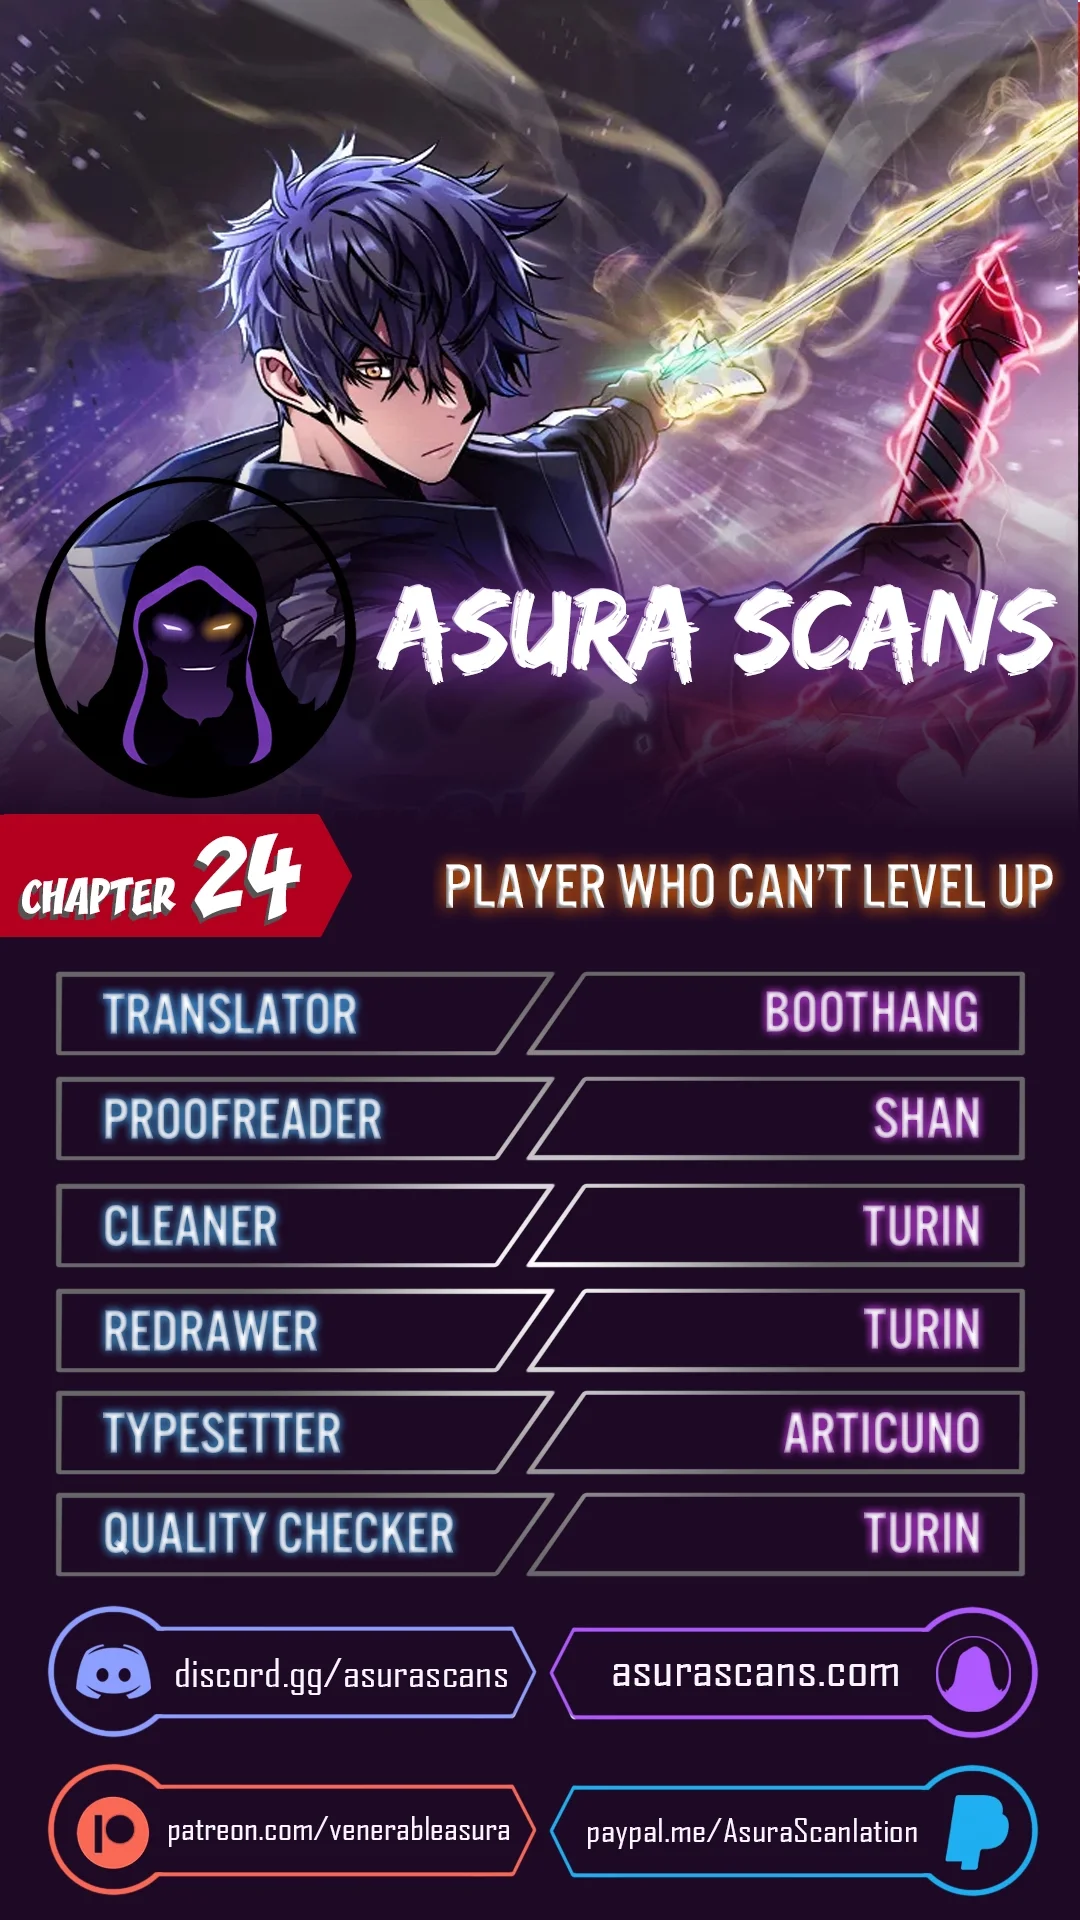 player-who-cant-level-up-chap-24-0